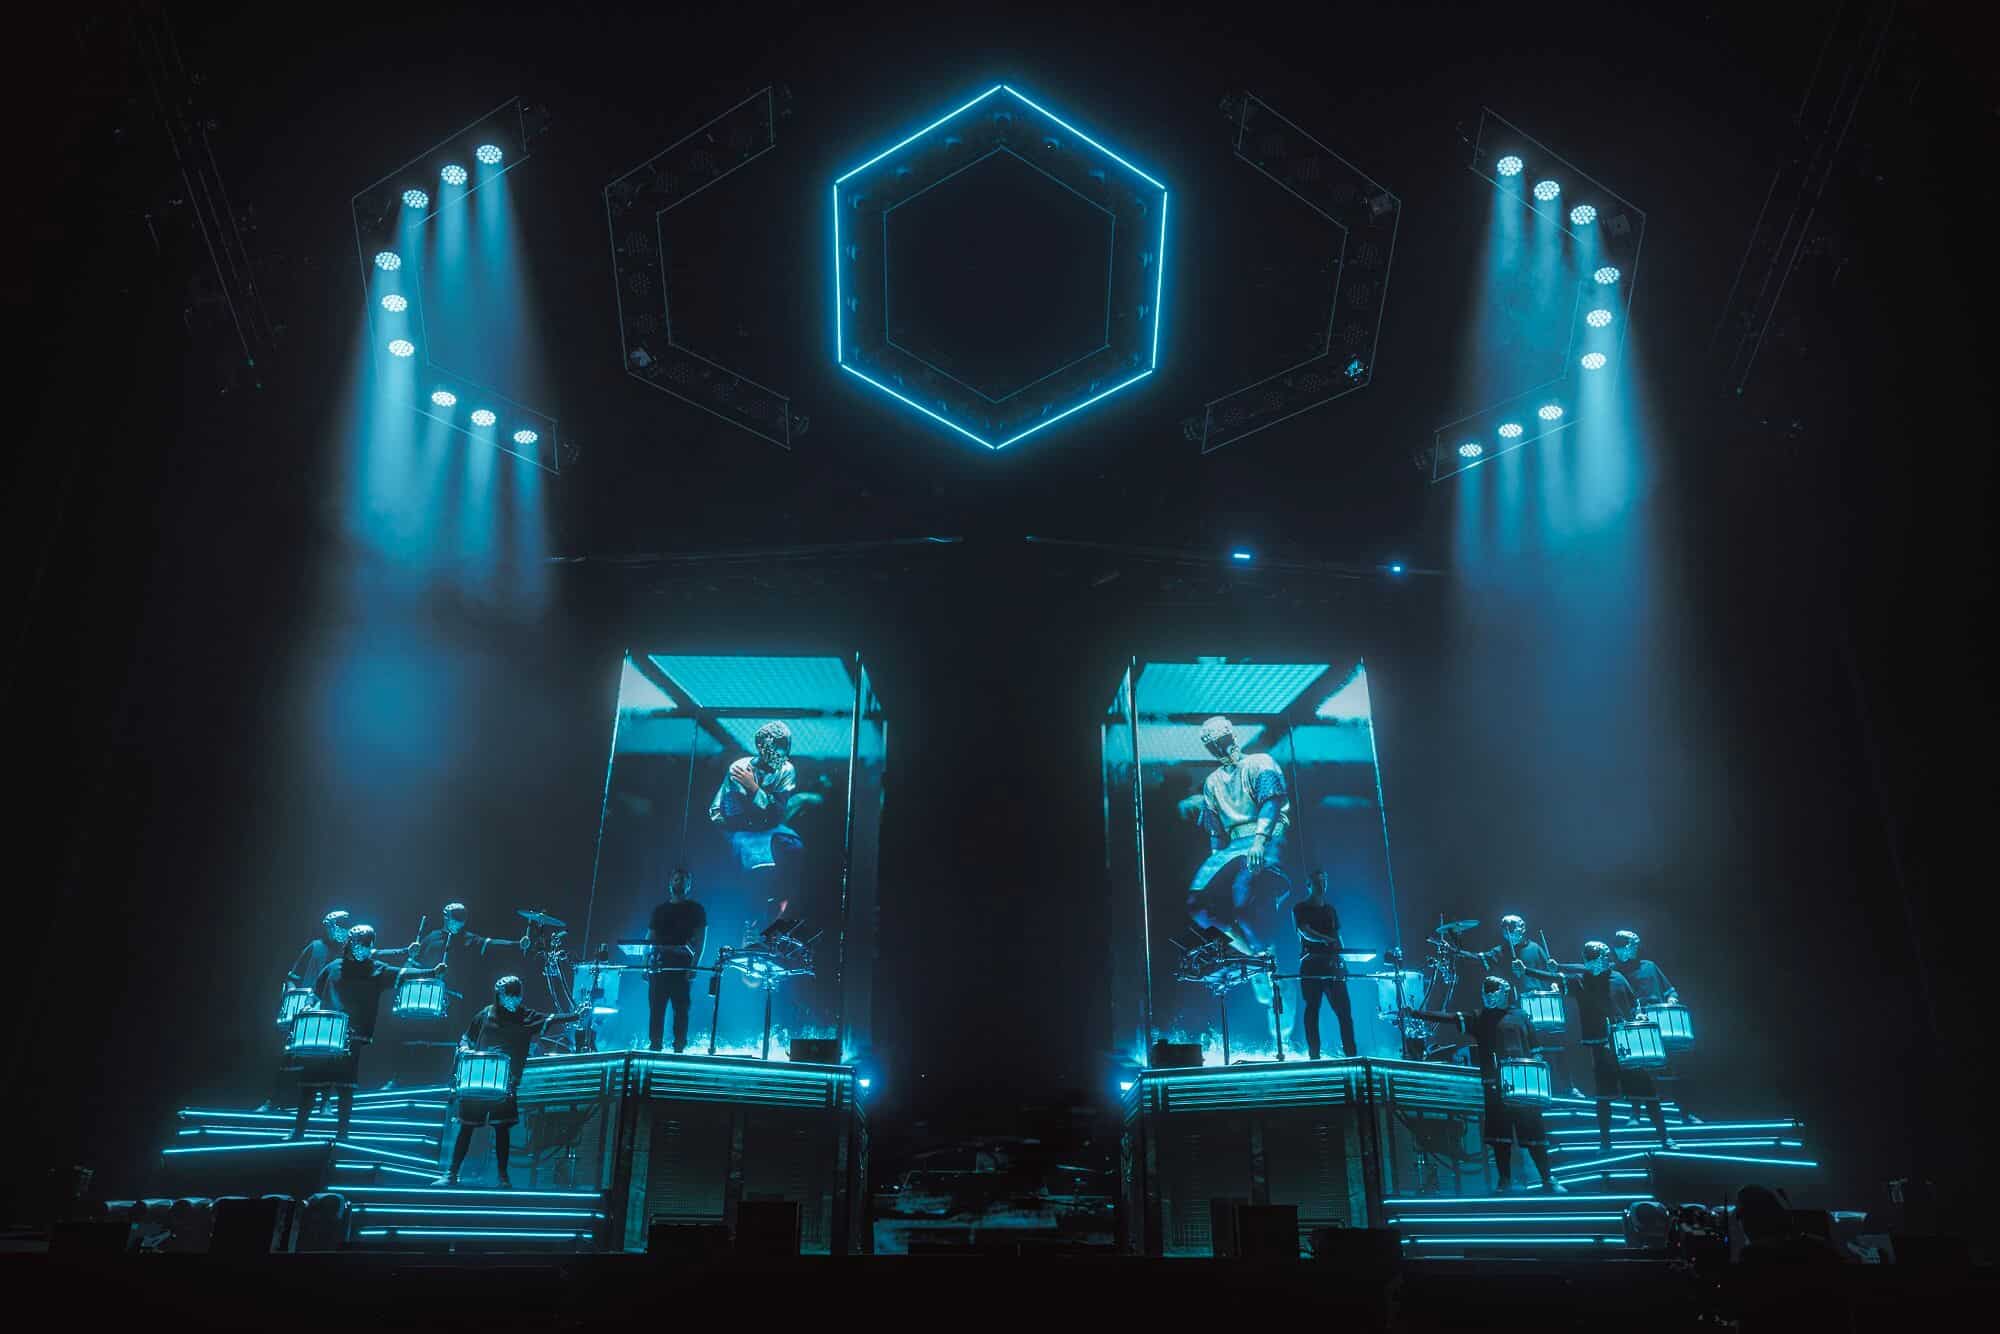 ODESZA kicks off first live shows in 3 years